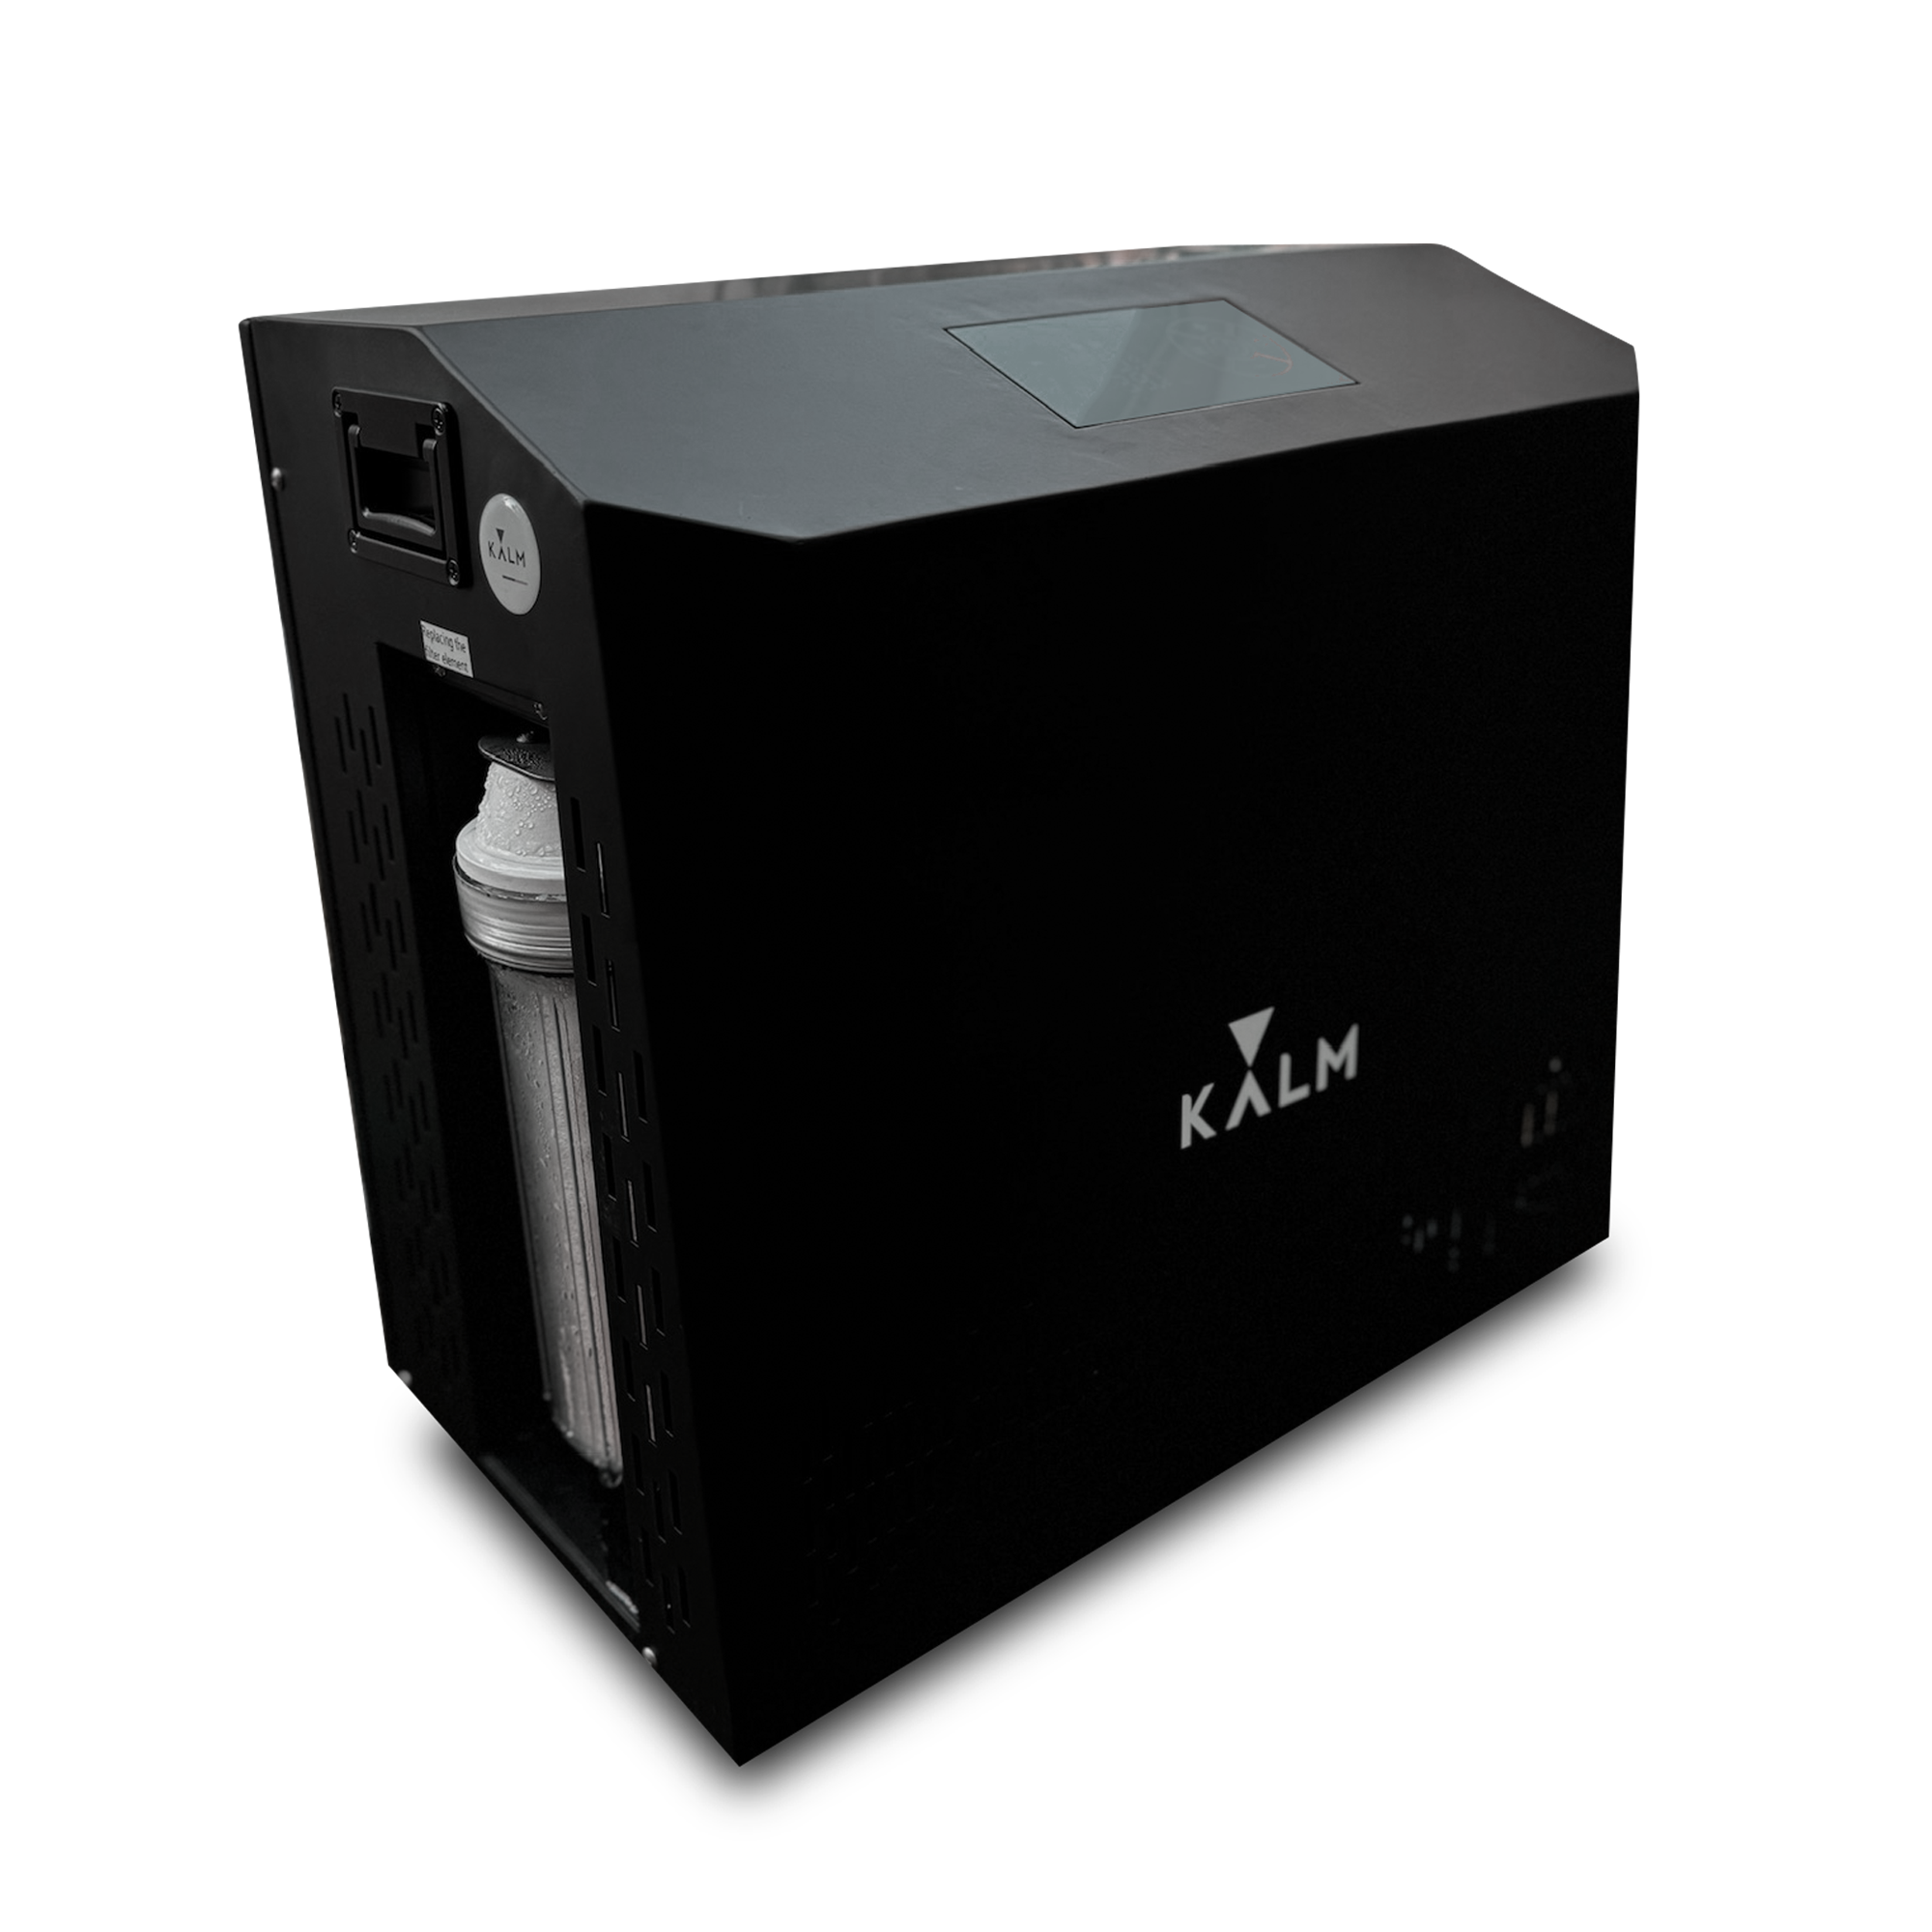 Kalm KryoSPA 1HP Water Chiller for Ice Bath with Heater -WiFi Enabled and O-Zone Ready -suitable for Cold plunge Tubs